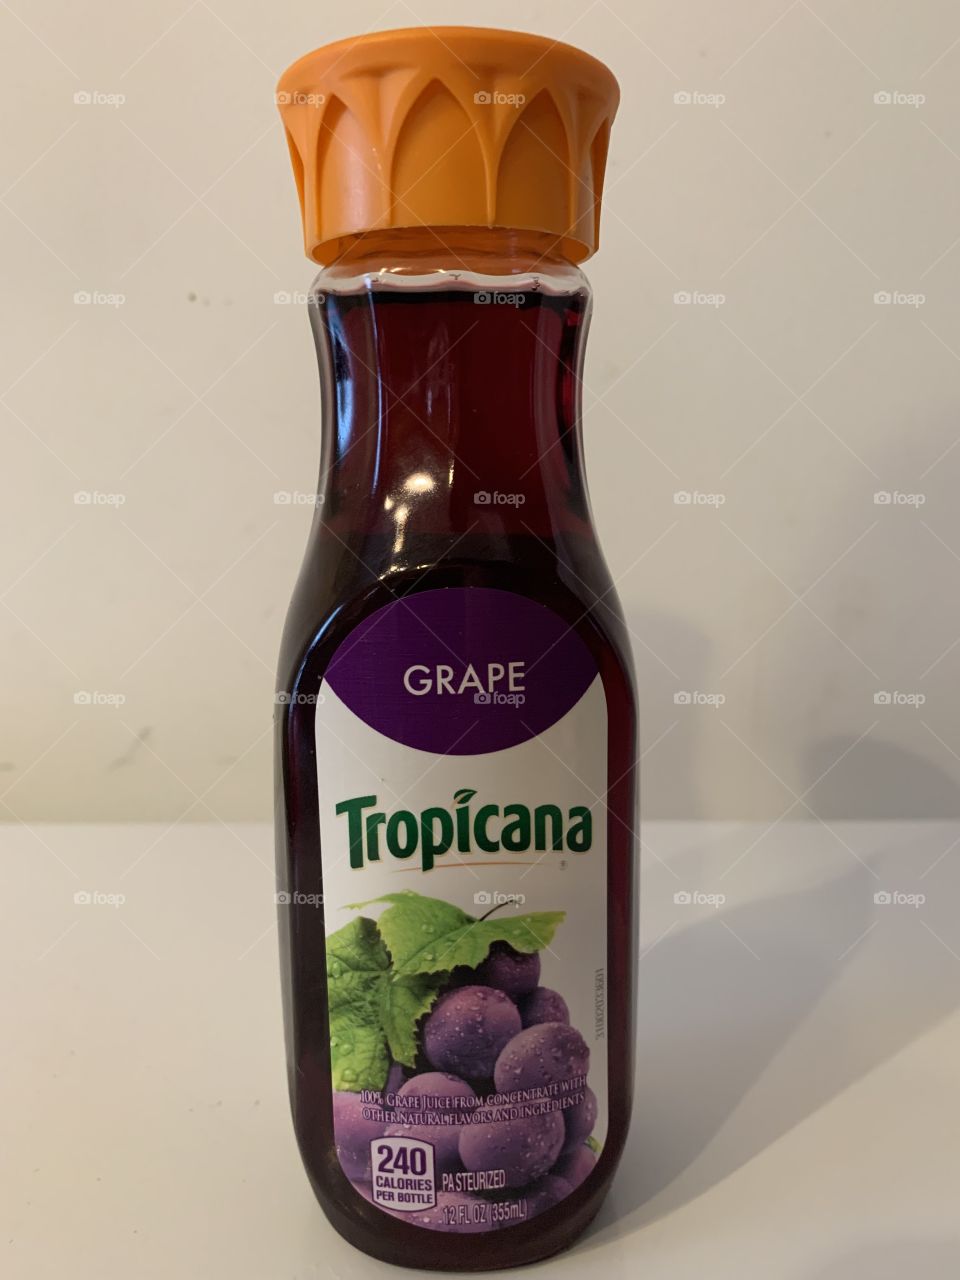 DATE TROPICANA, IT’S A GREAT EXPERIENCE, SO GOOD! 